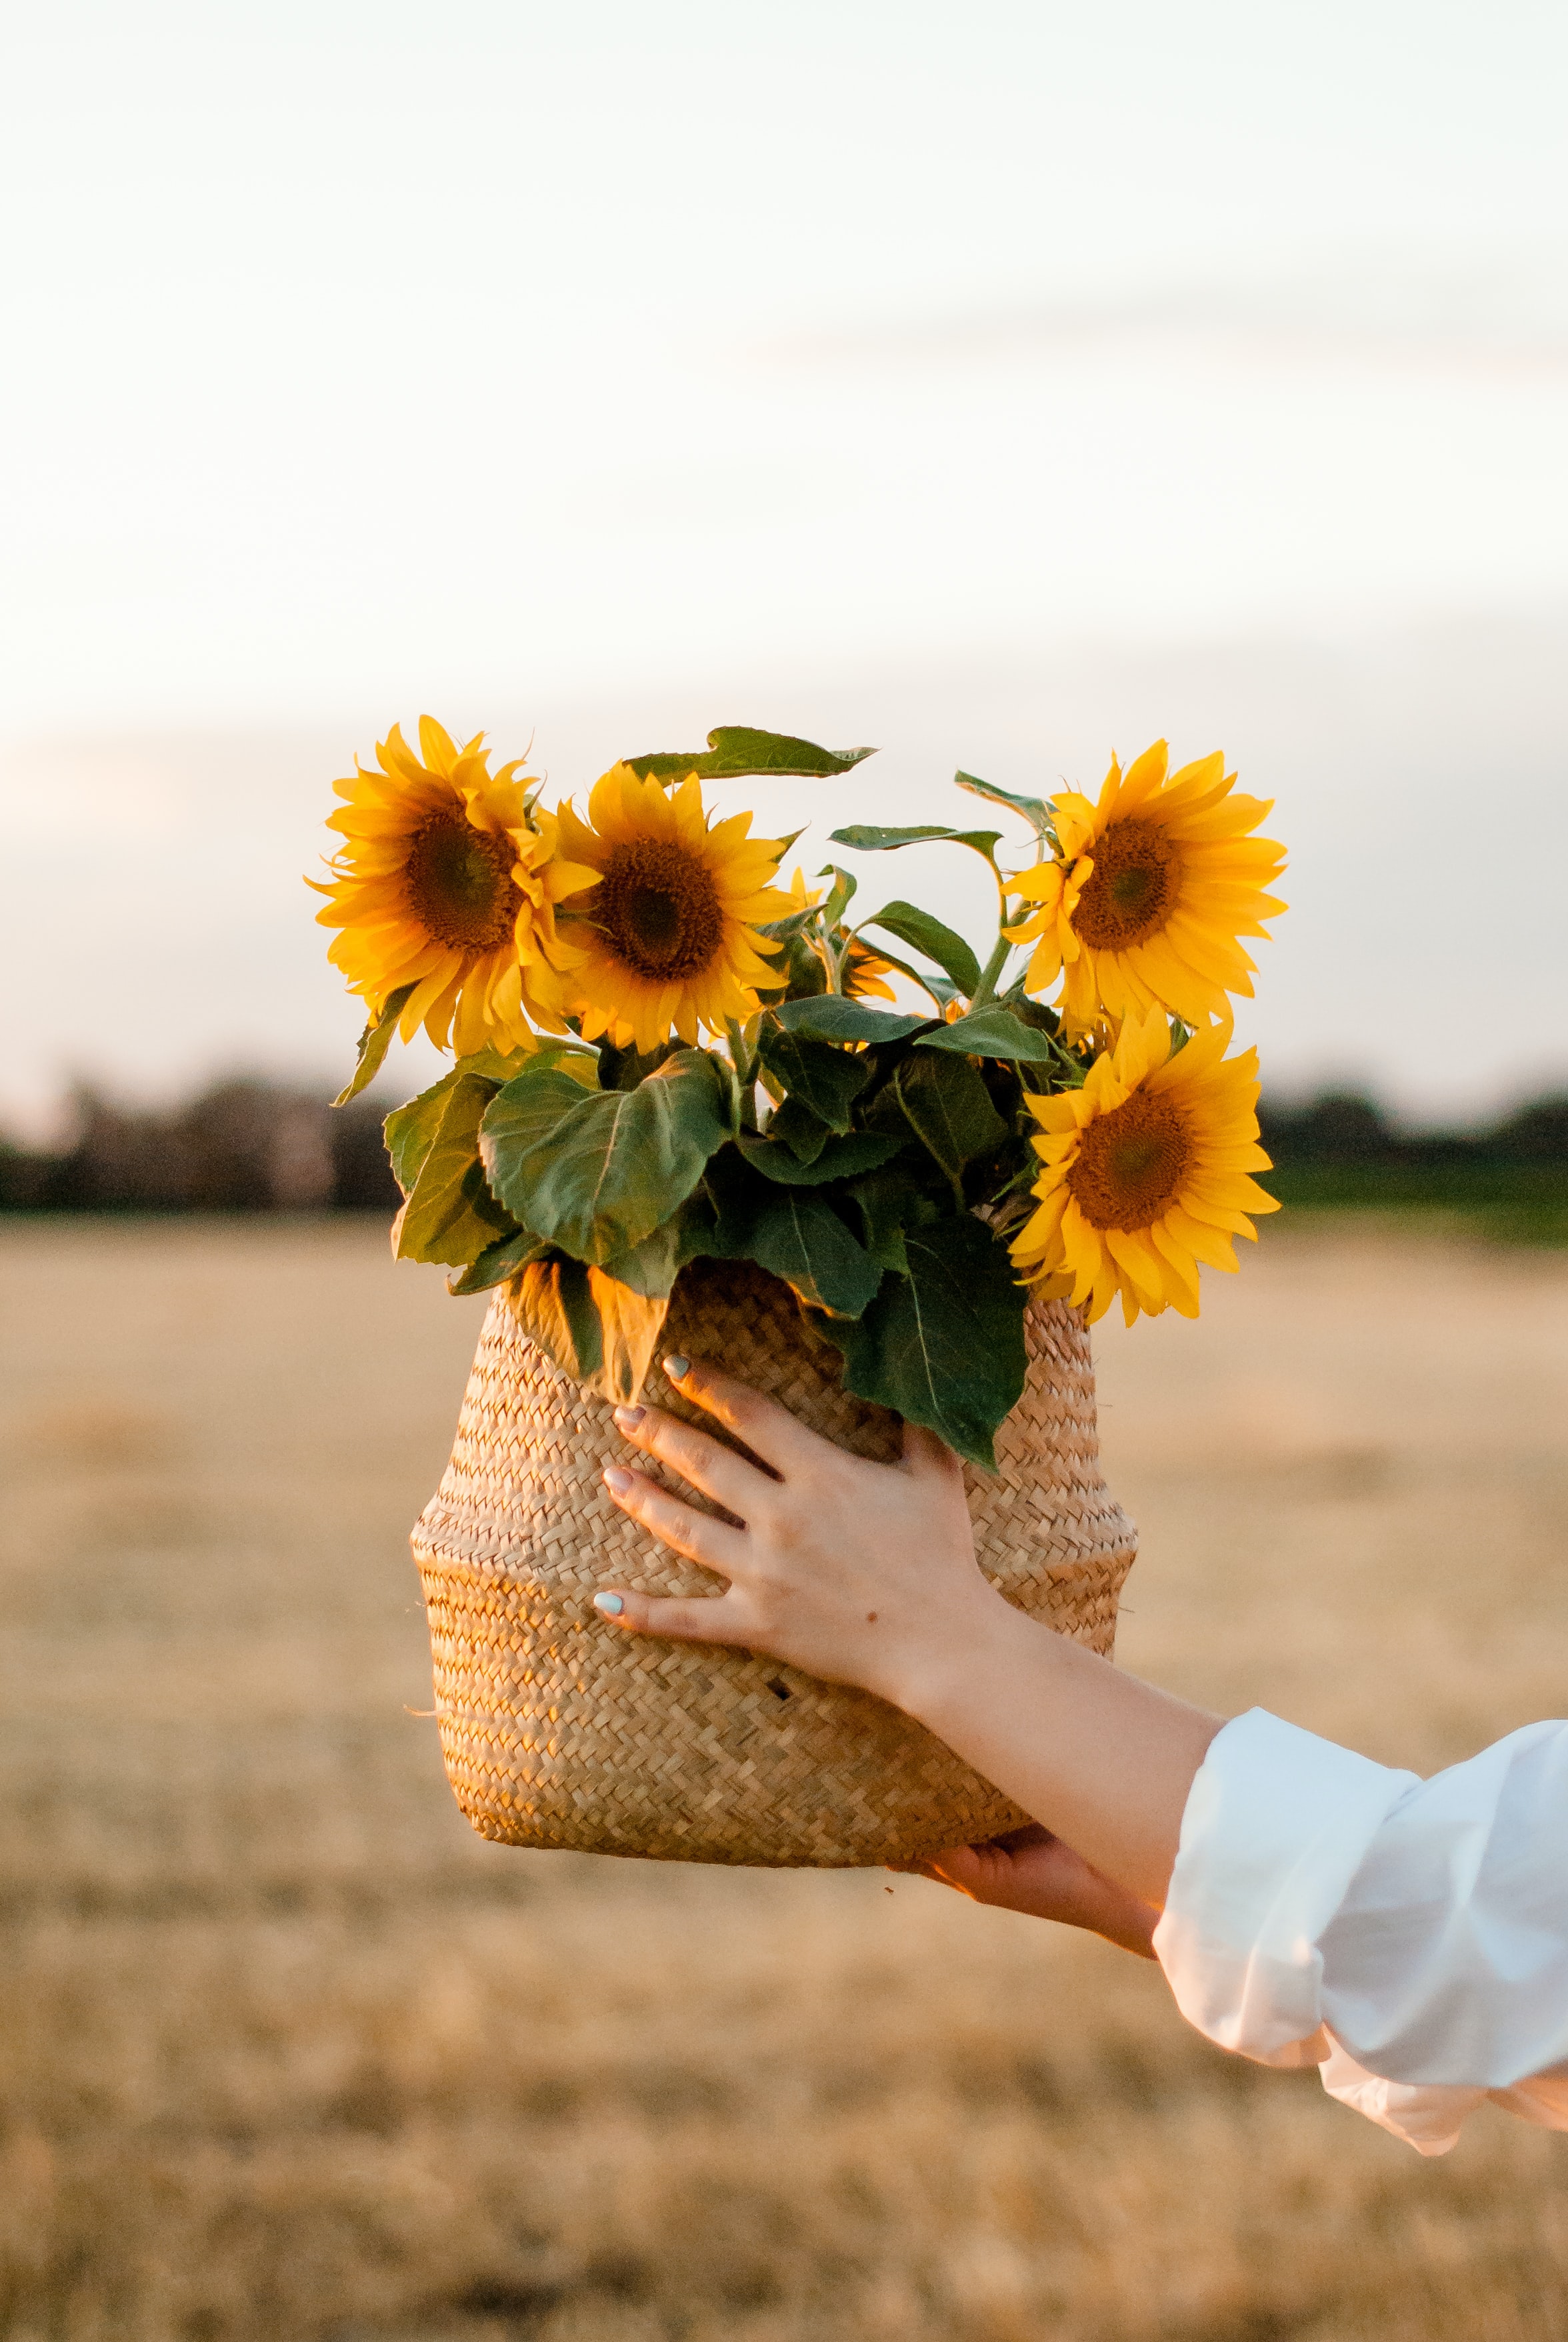 Free Images flowers, basket, hands Sunflowers